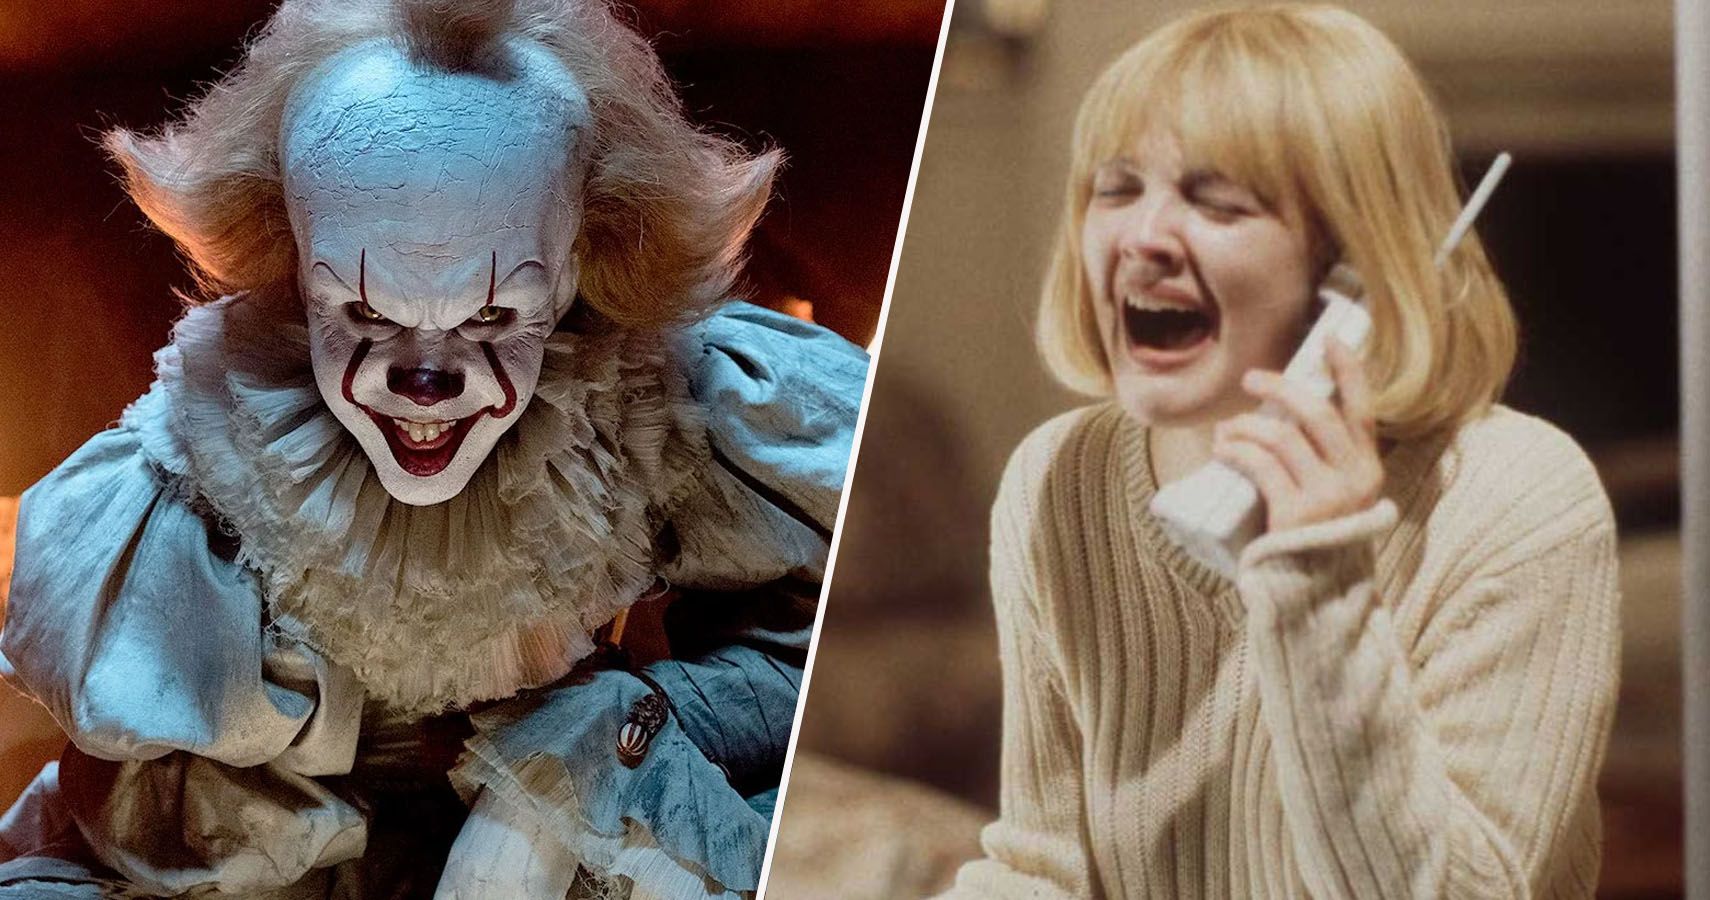 Ranking The Scariest Horror Movie Moments From Worst To Best www